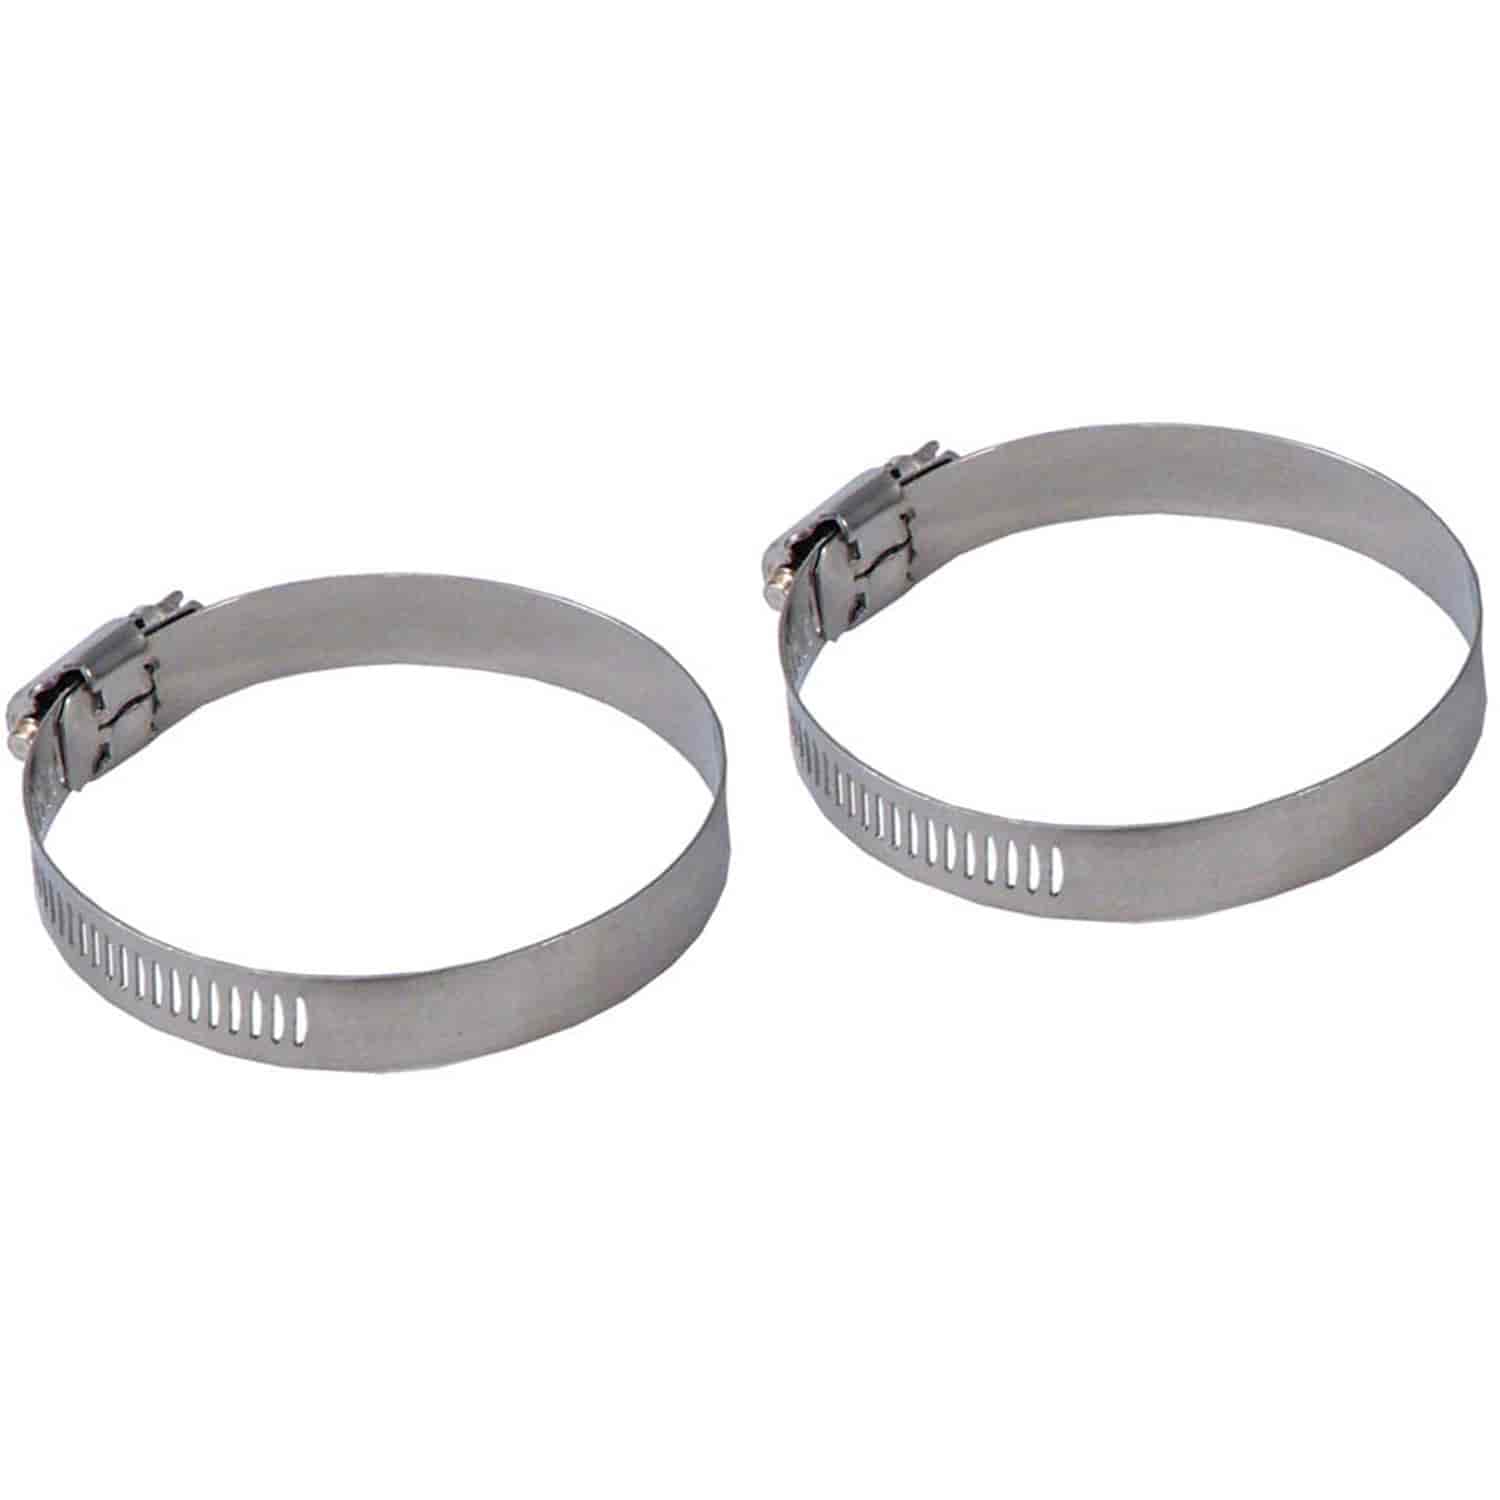 Worm Gear Clamps Fits 2.5" Tubing